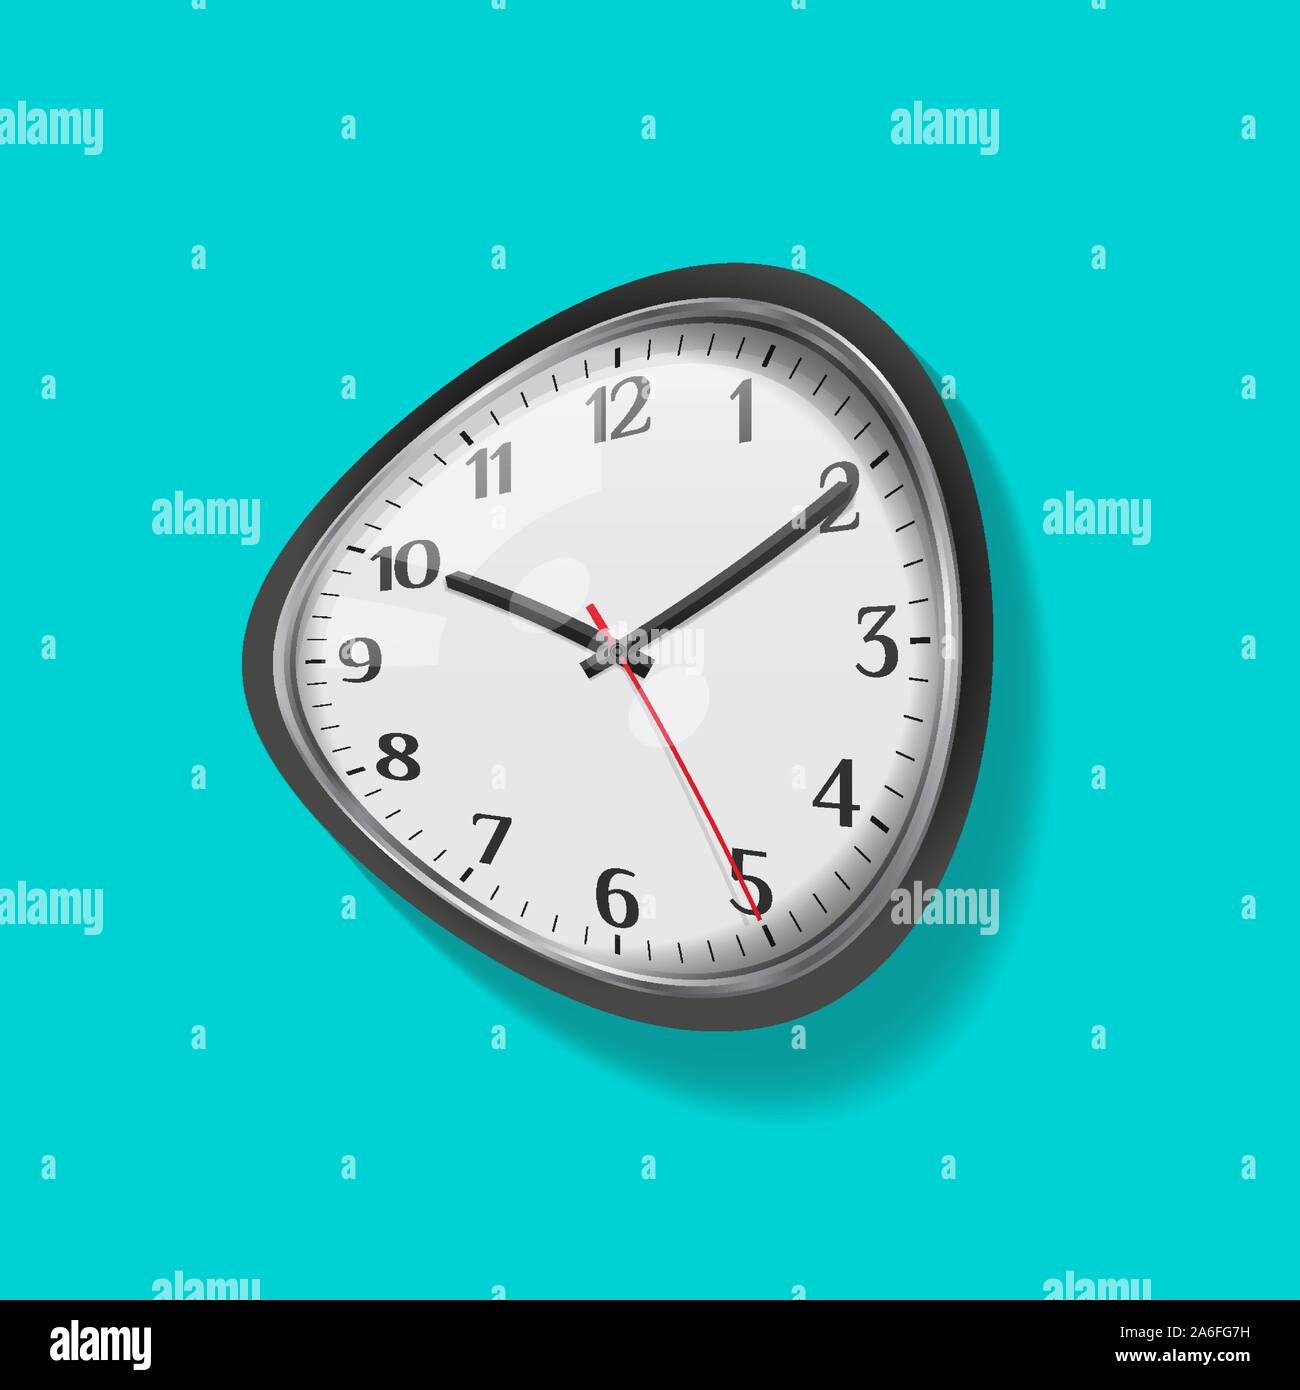 Melting clock, distorted dial with shadow on a blue background. Based on Salvador Dali Persistance of Memory concept. Vector illustration. Stock Vector